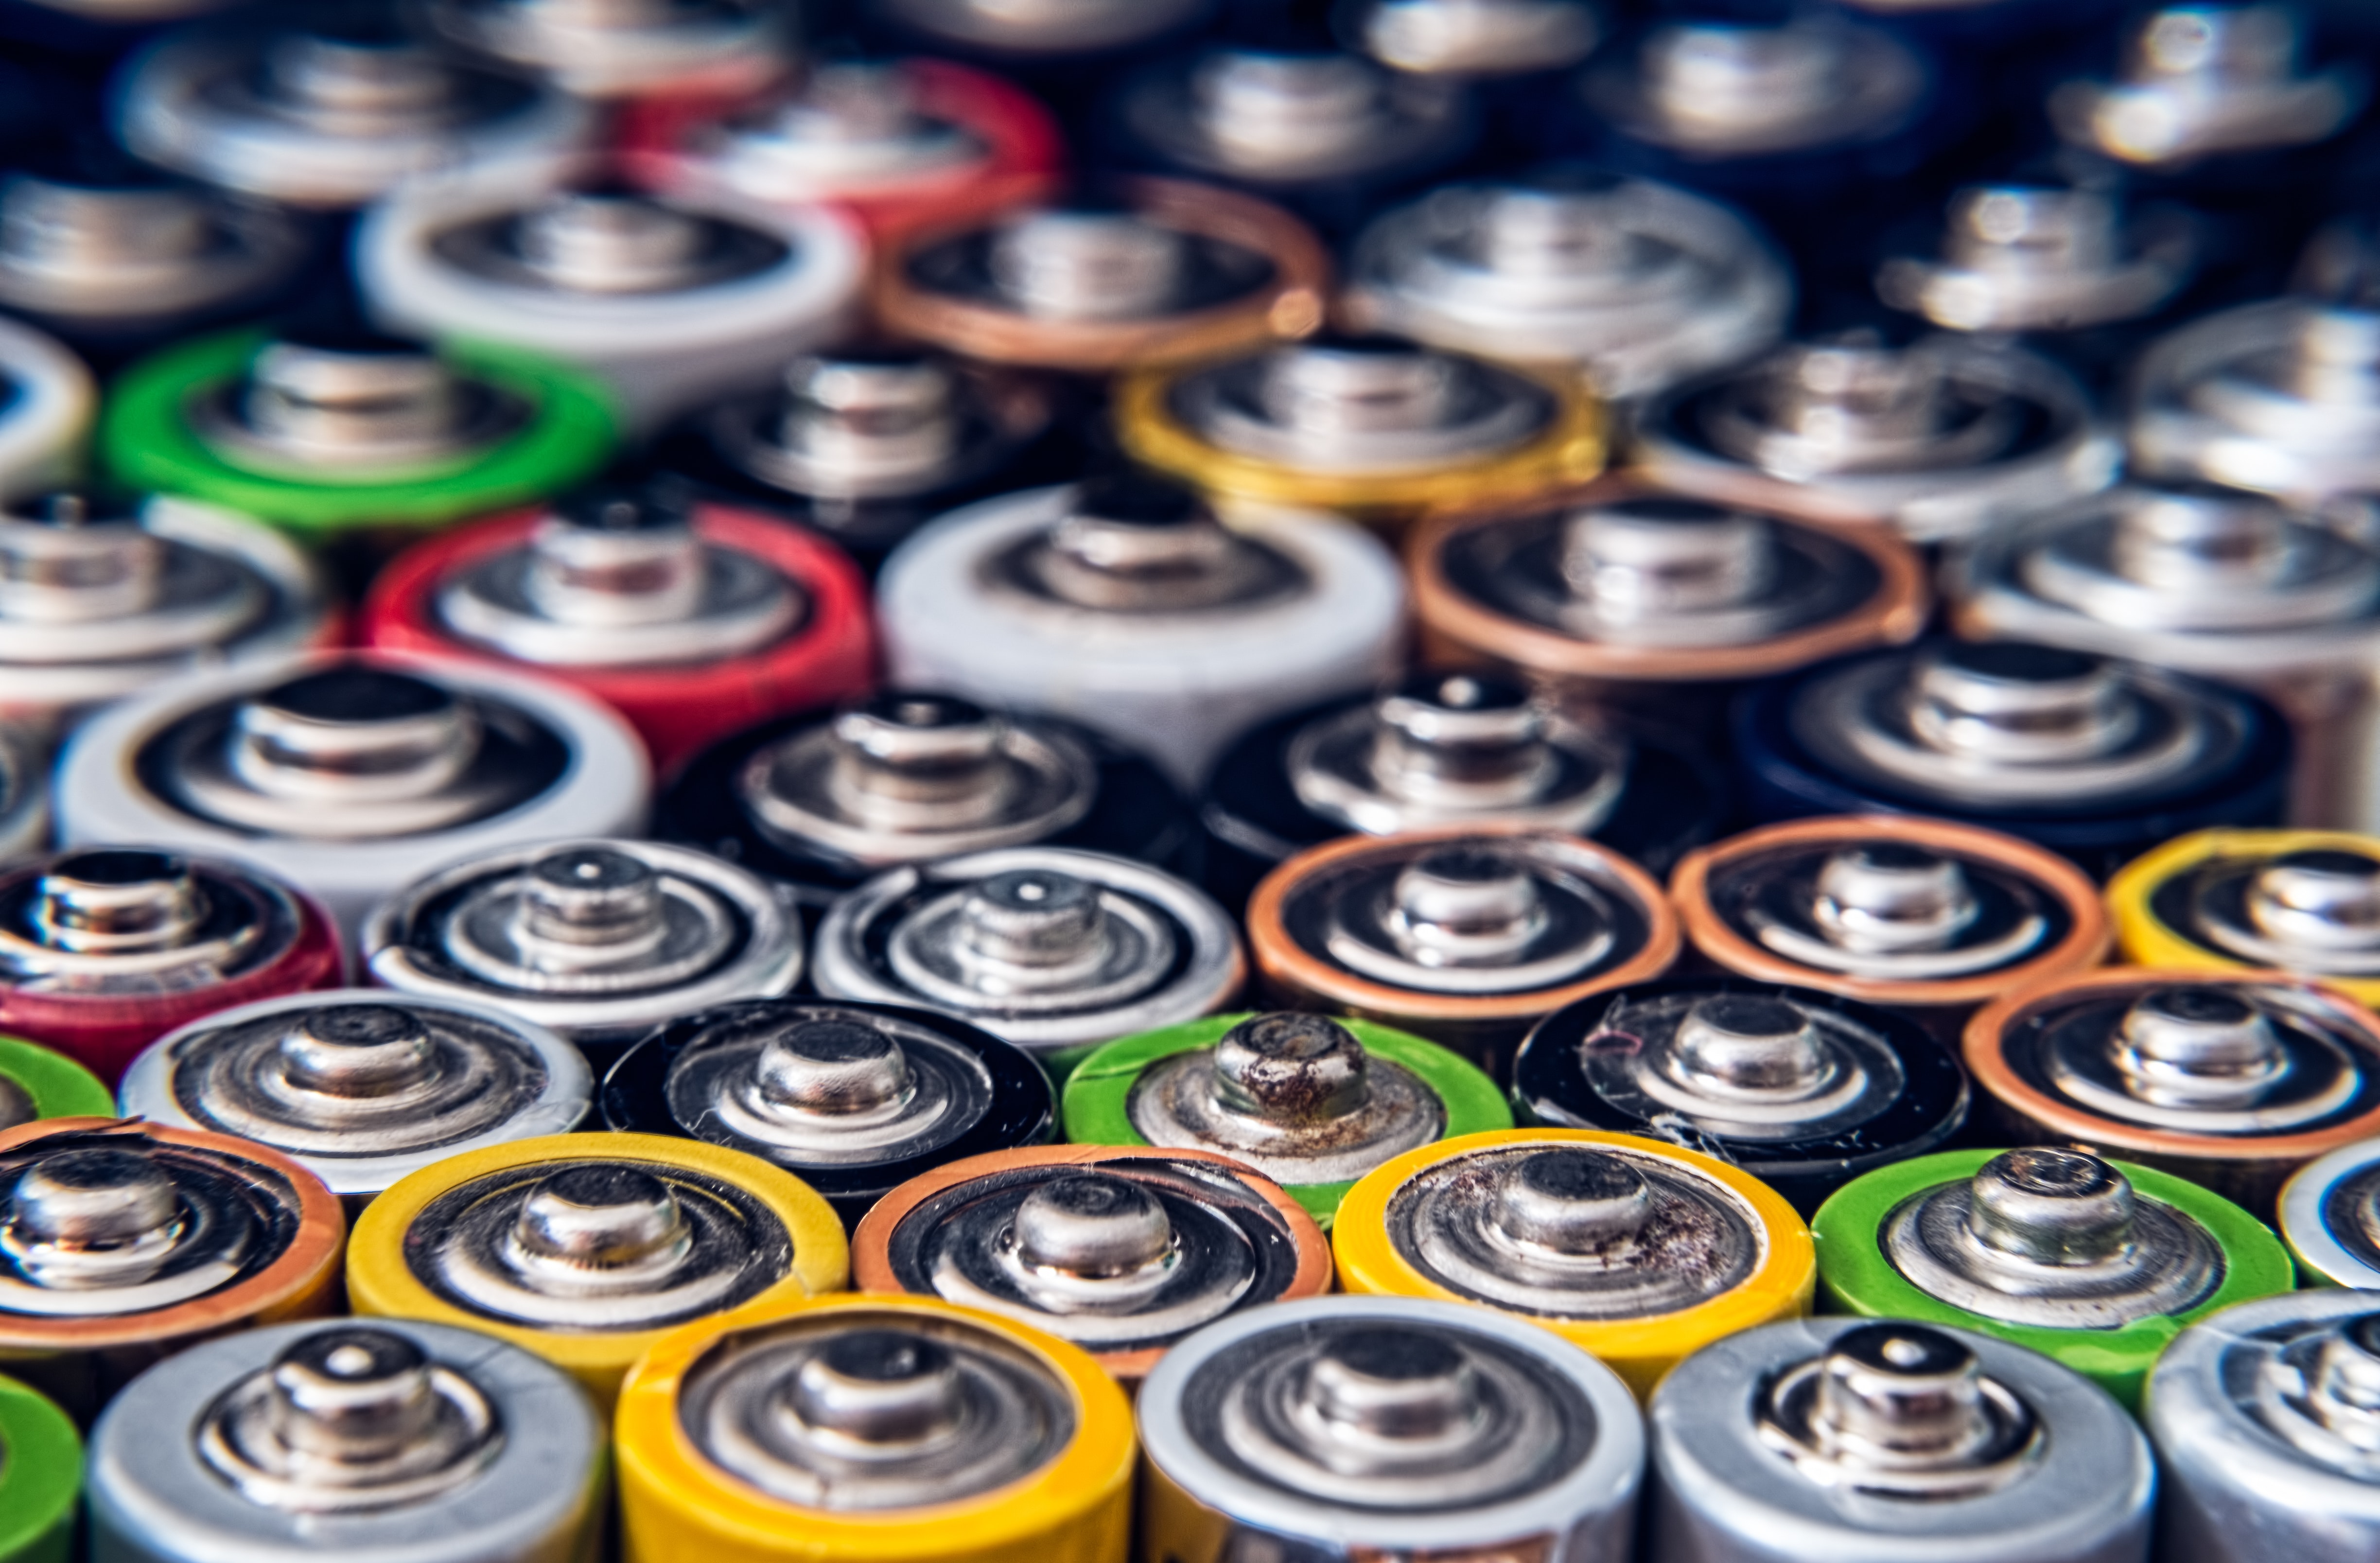 Plans in the works for UK’s first lithium refinery and largest battery recycling facility